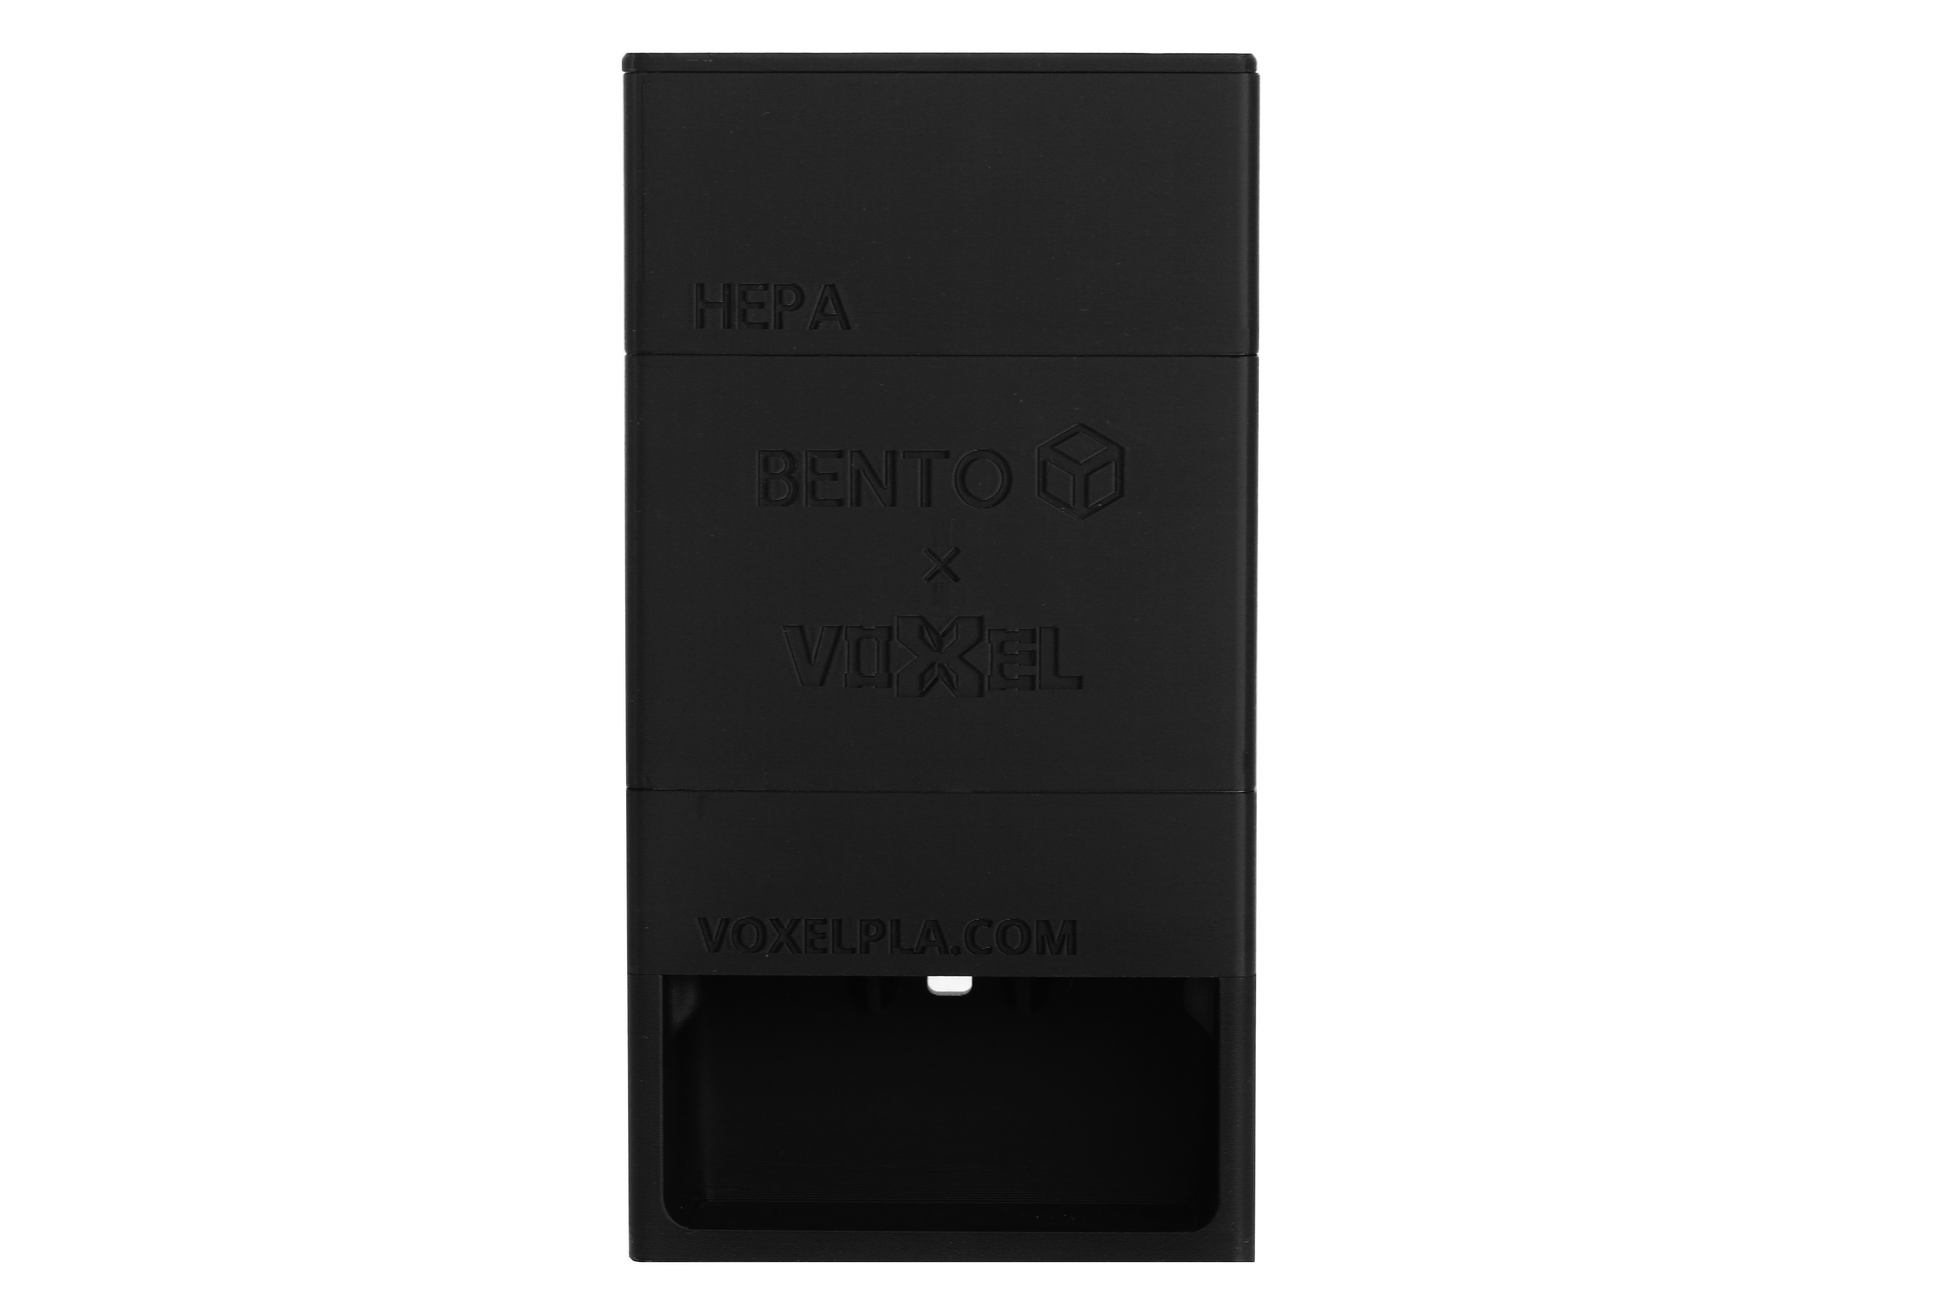 Black Bento Box 3D Printer Filter with HEPA 13 and Activated Carbon for Bambu Lab P1P 3D Printer